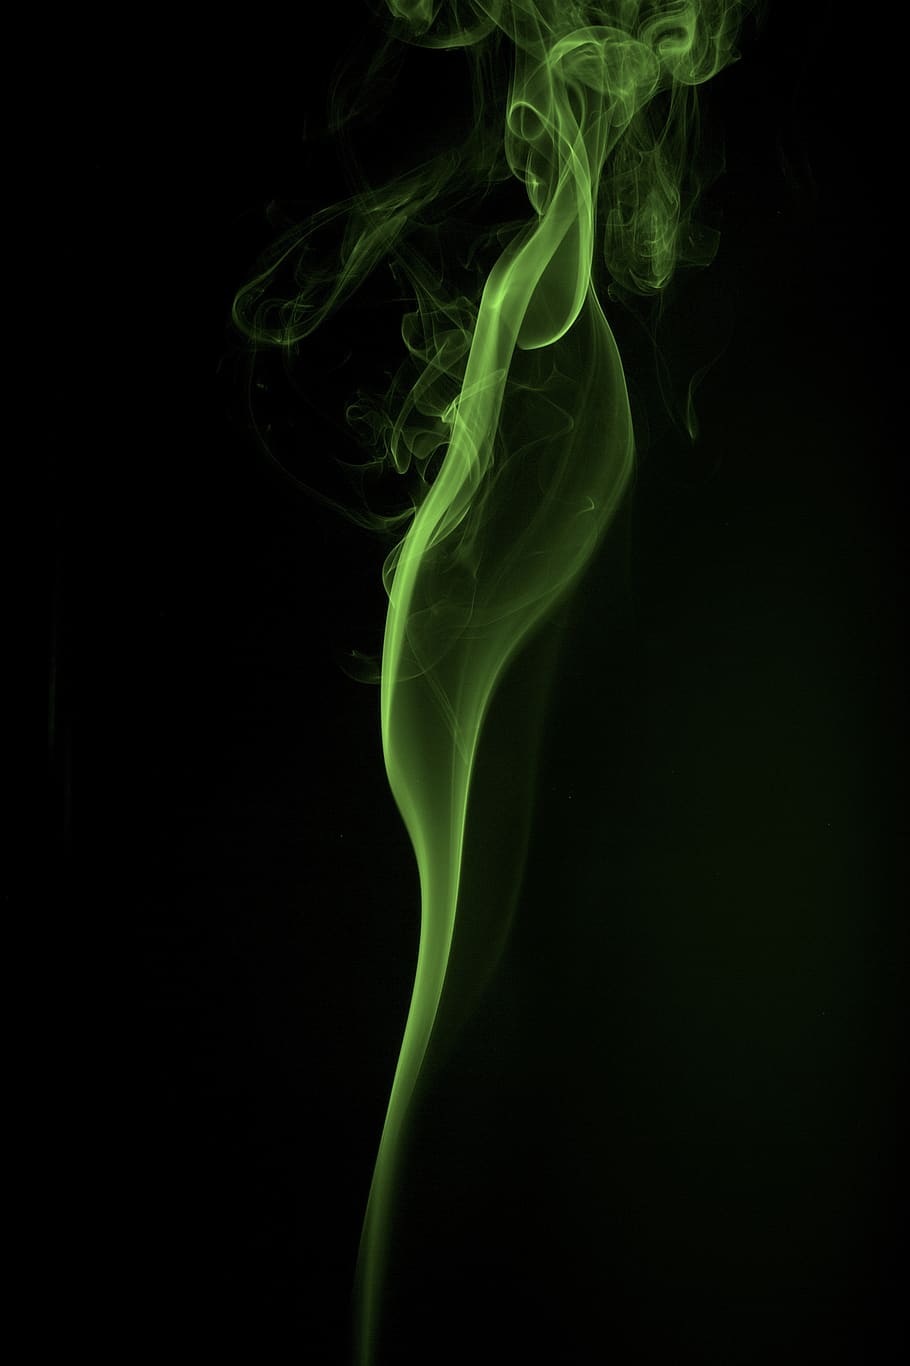 smoke, art, cigarette, smoke - physical structure, studio shot, black background, motion, green color, close-up, indoors